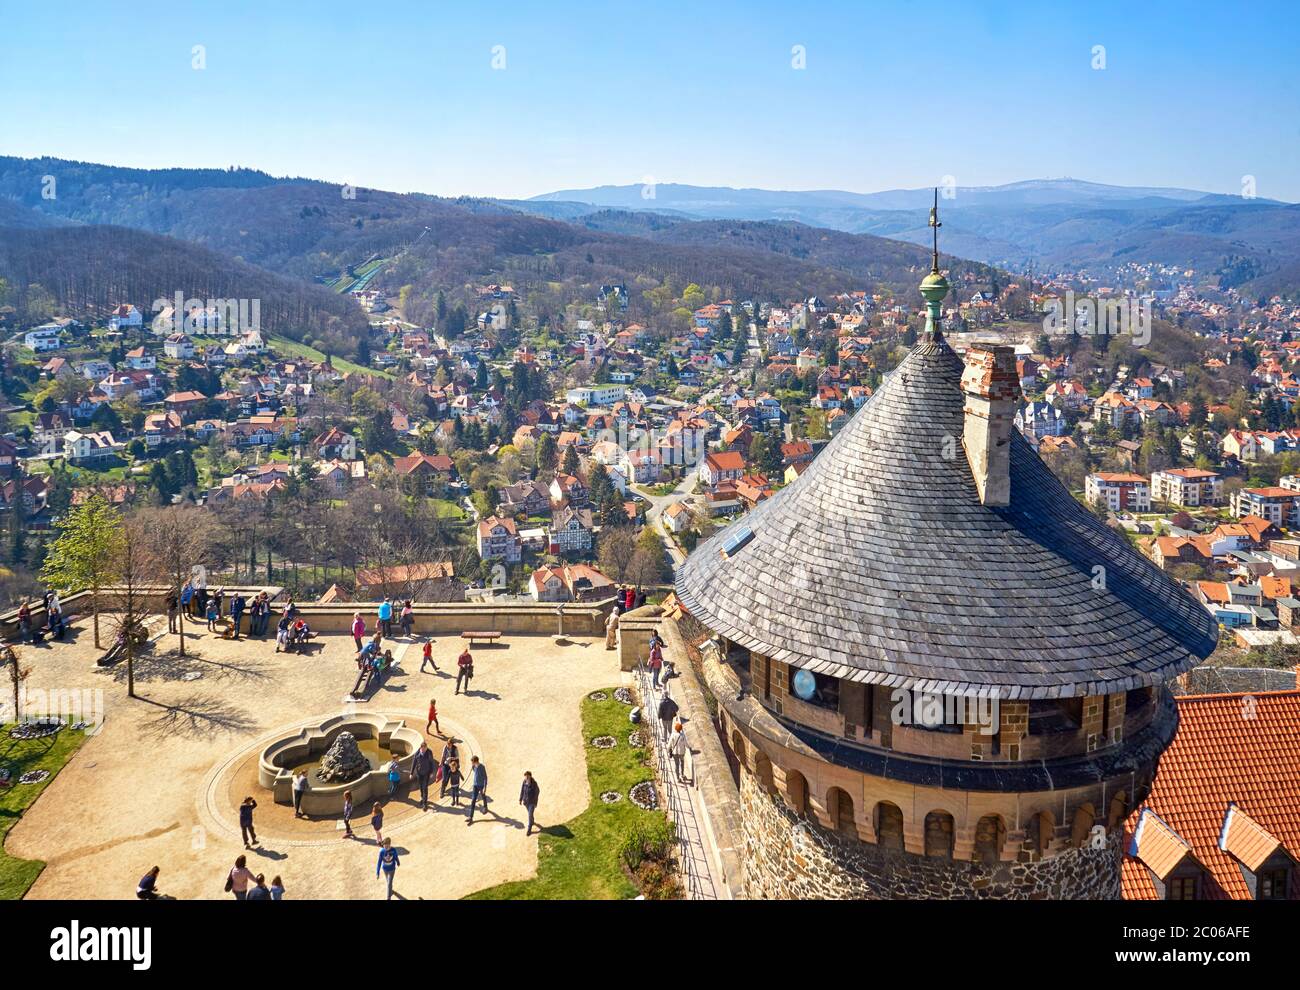 View of the courtyard with tower at Wernigerode Castle with the Harz Mountains and the city in the background. Germany Stock Photo